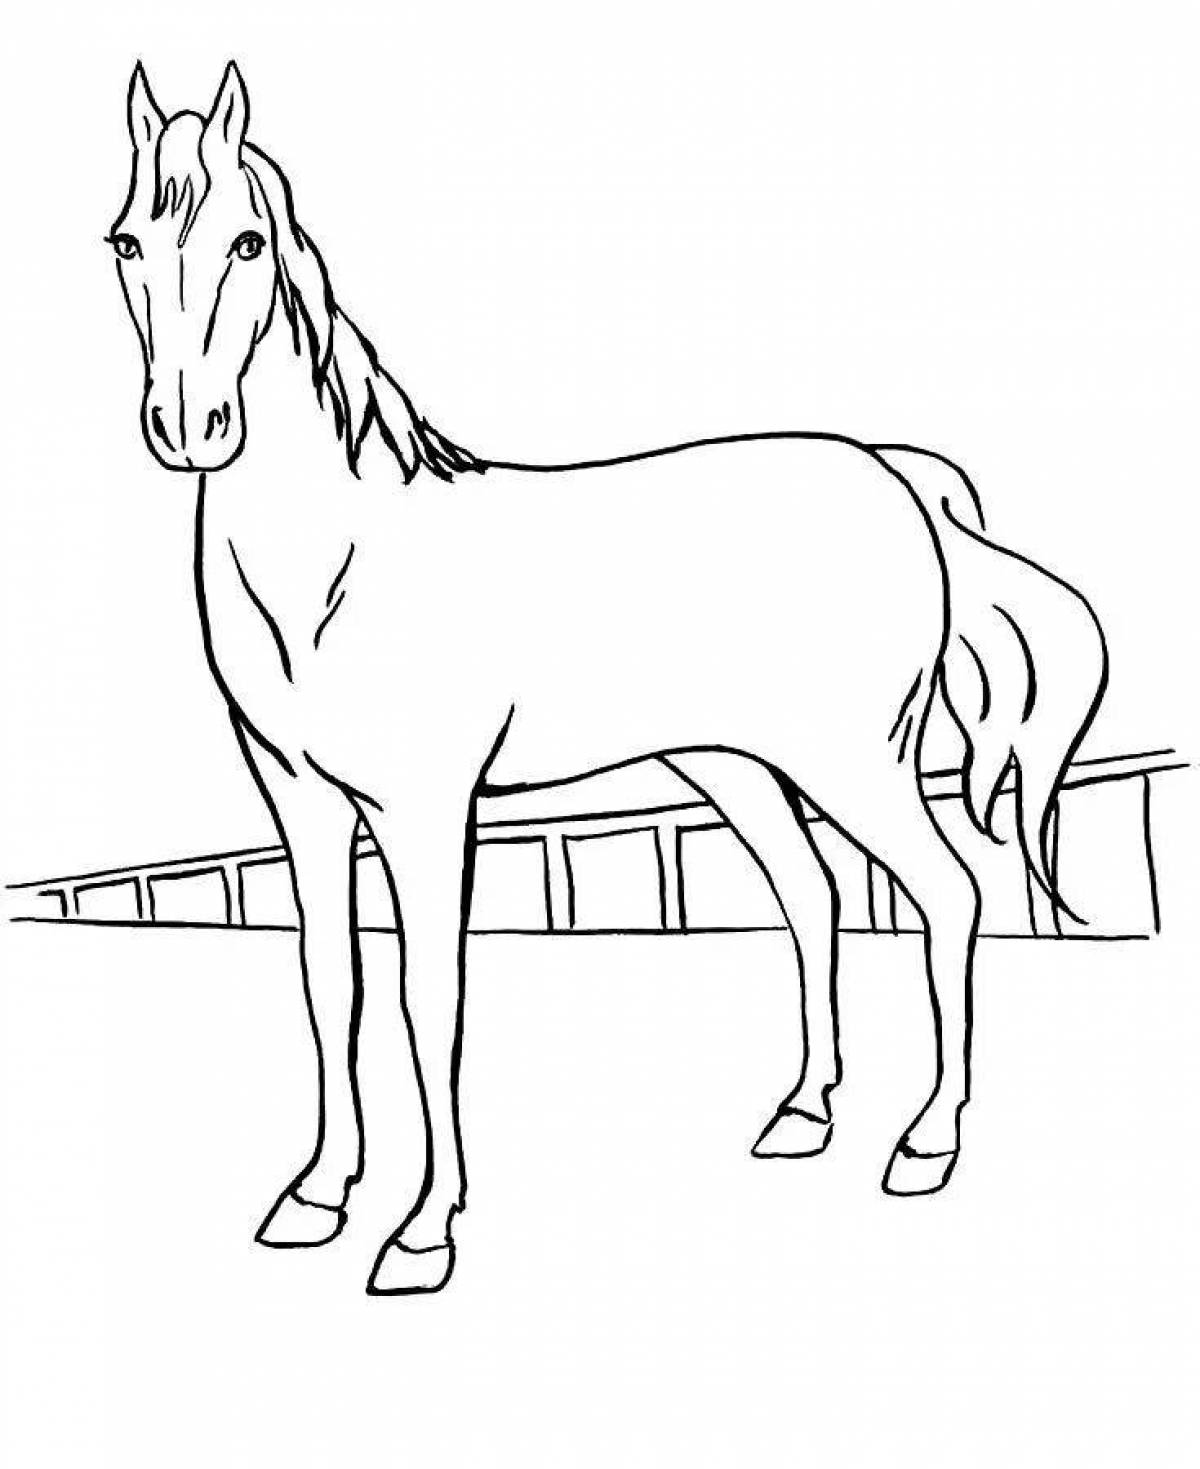 Majestic palomino horse coloring book for kids